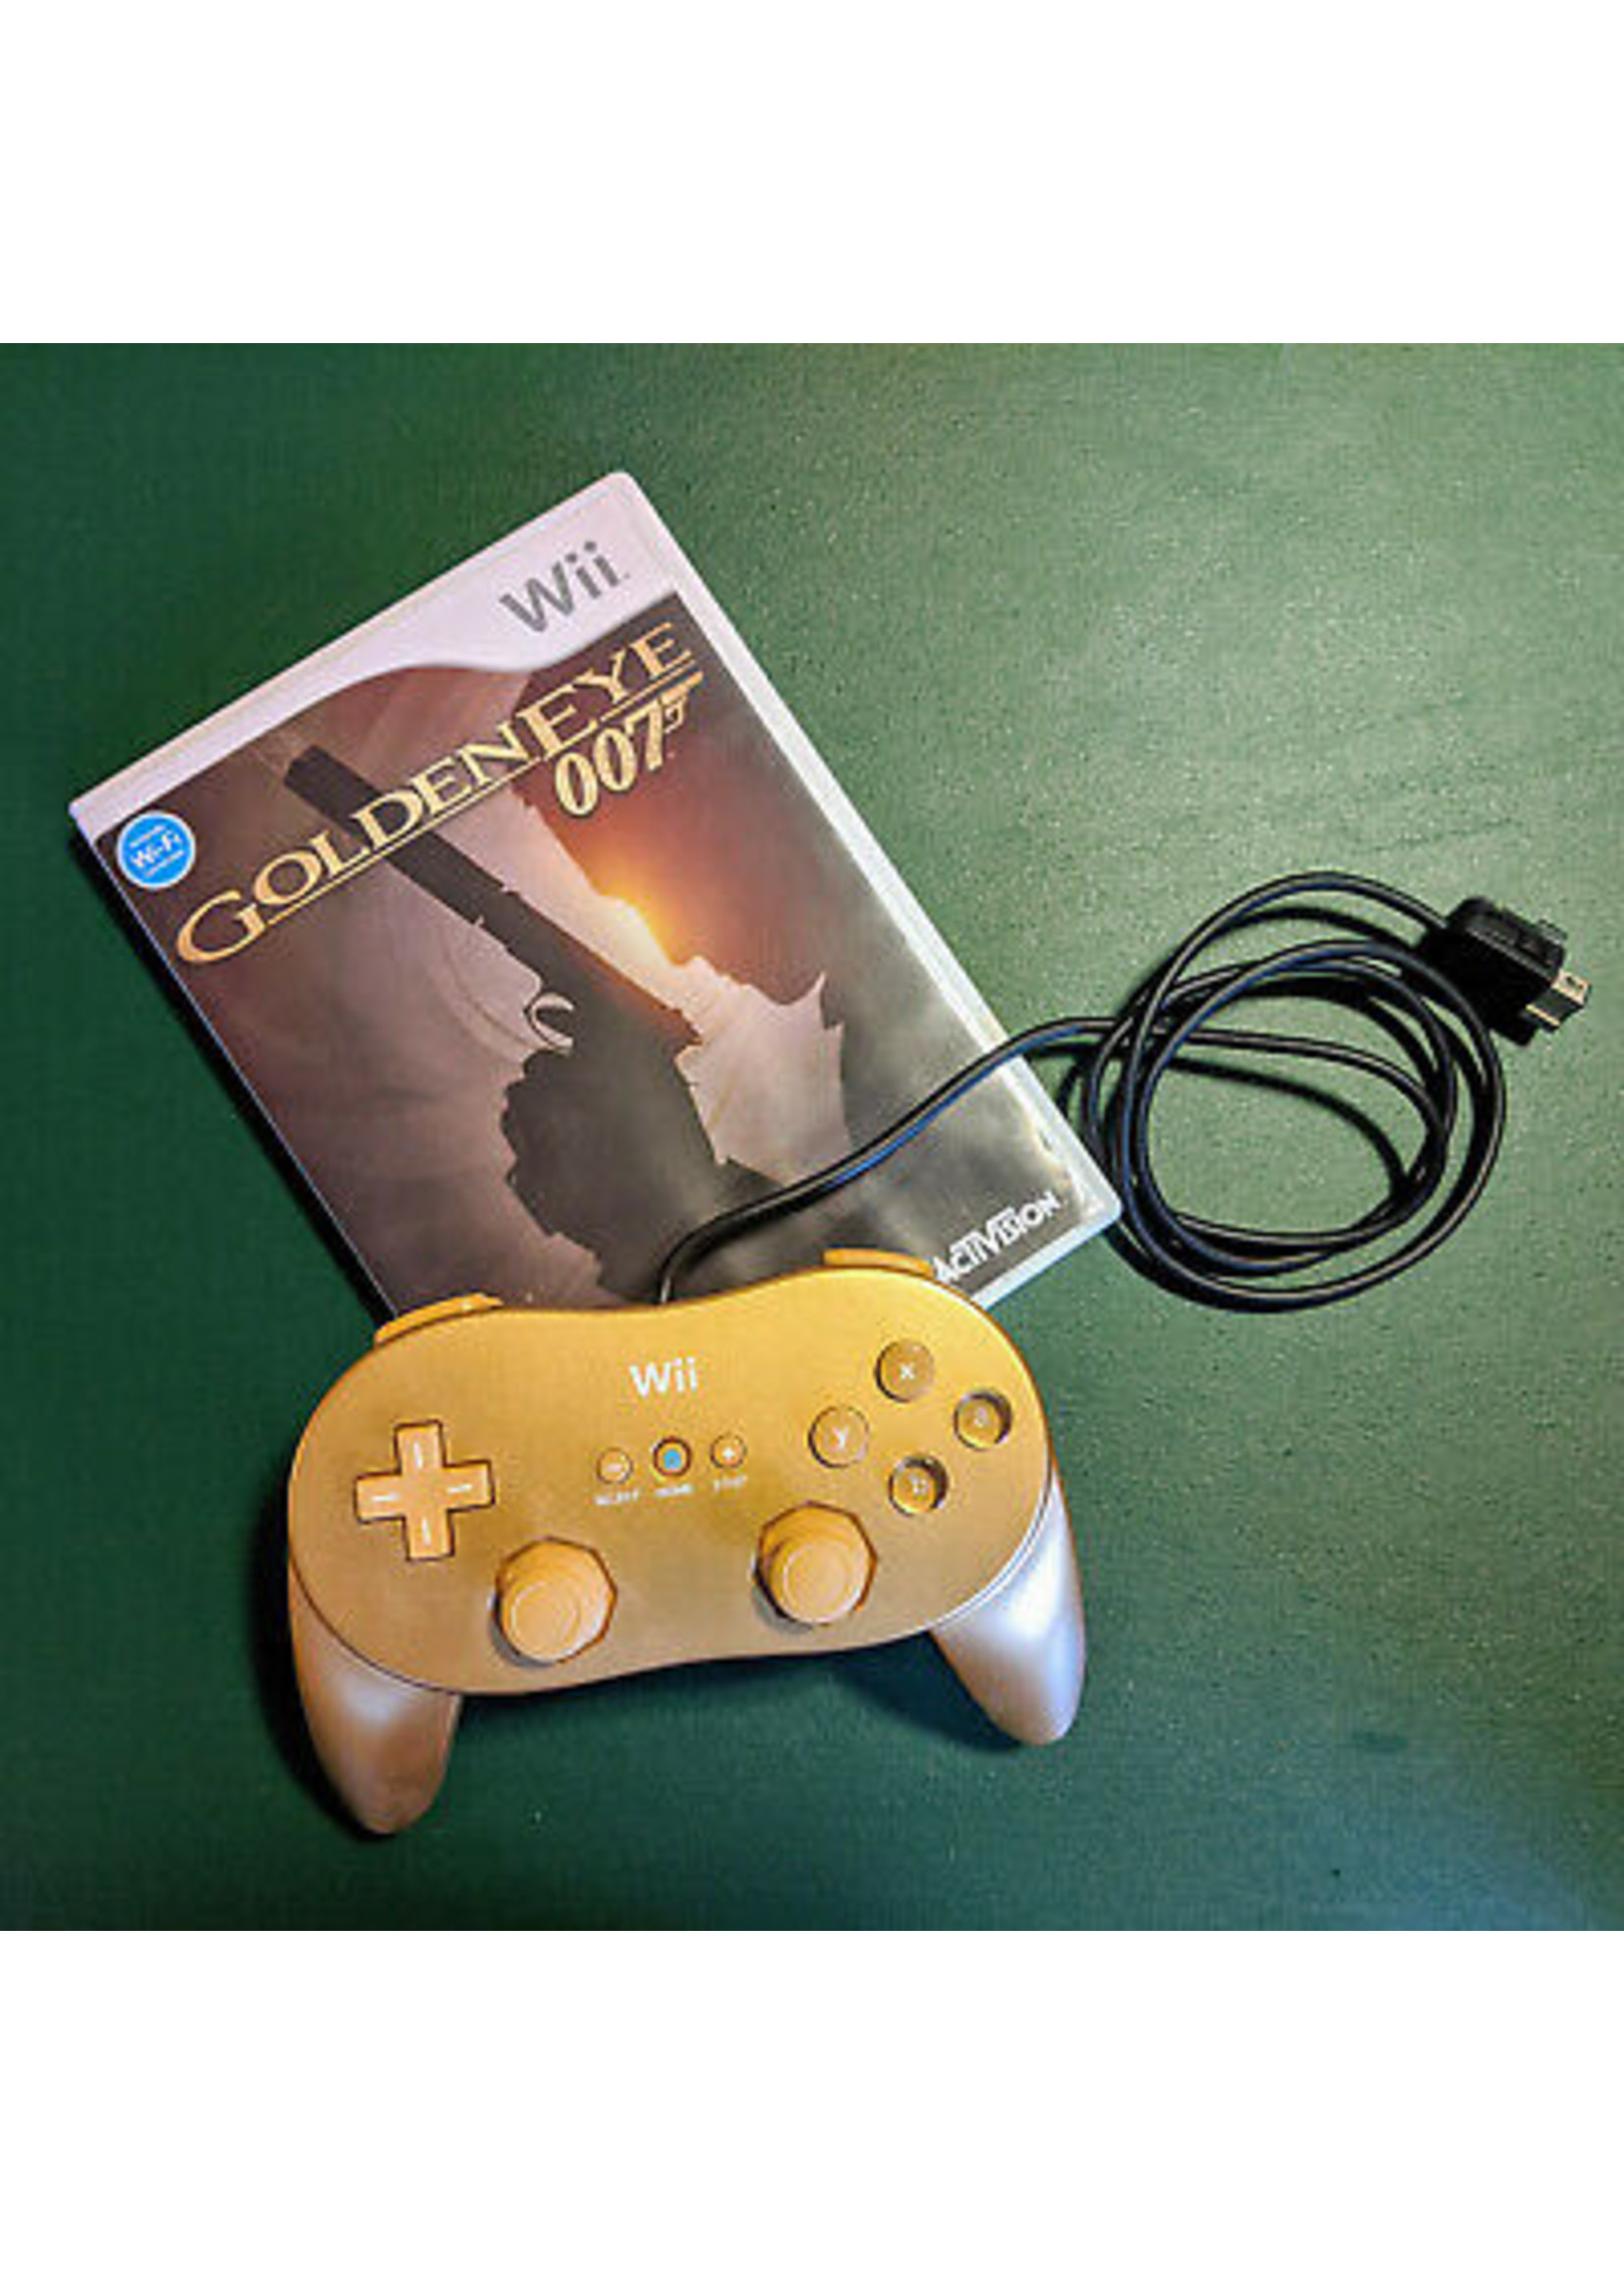 Goldeneye 007 game + Golden Wii Controller - D&J Computers And Games